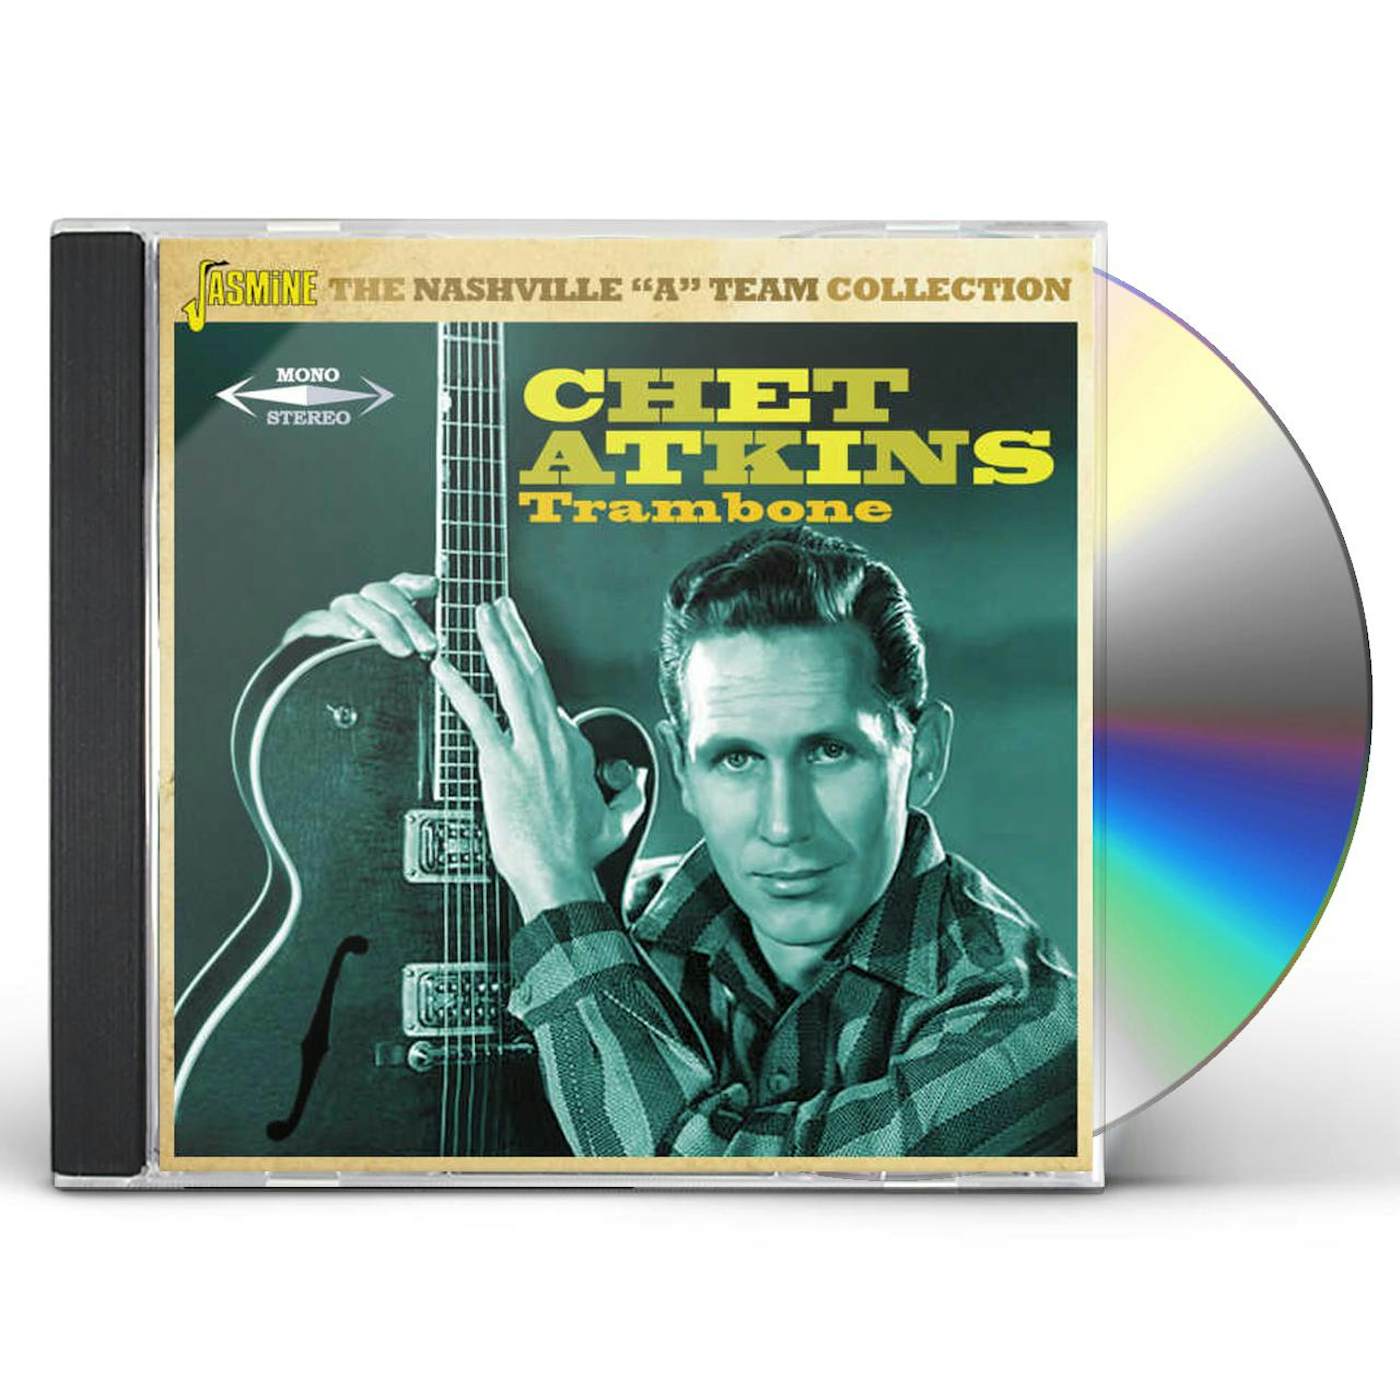 Chet Atkins TRAMBONE: THE NASHVILLE A TEAM COLLECTION CD